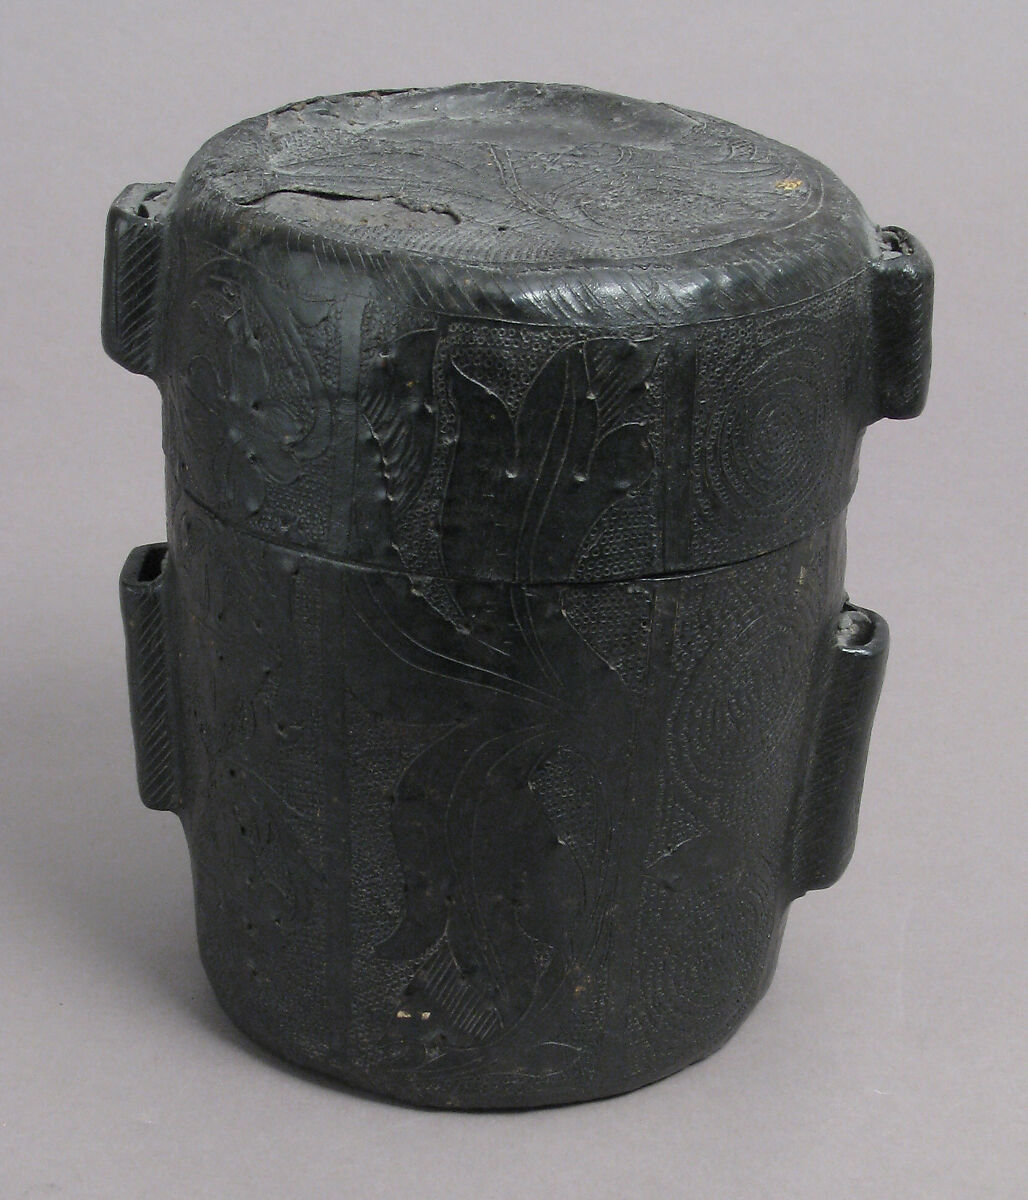 Case, Cup, Cuir bouilli (tooled leather), Italian or French 